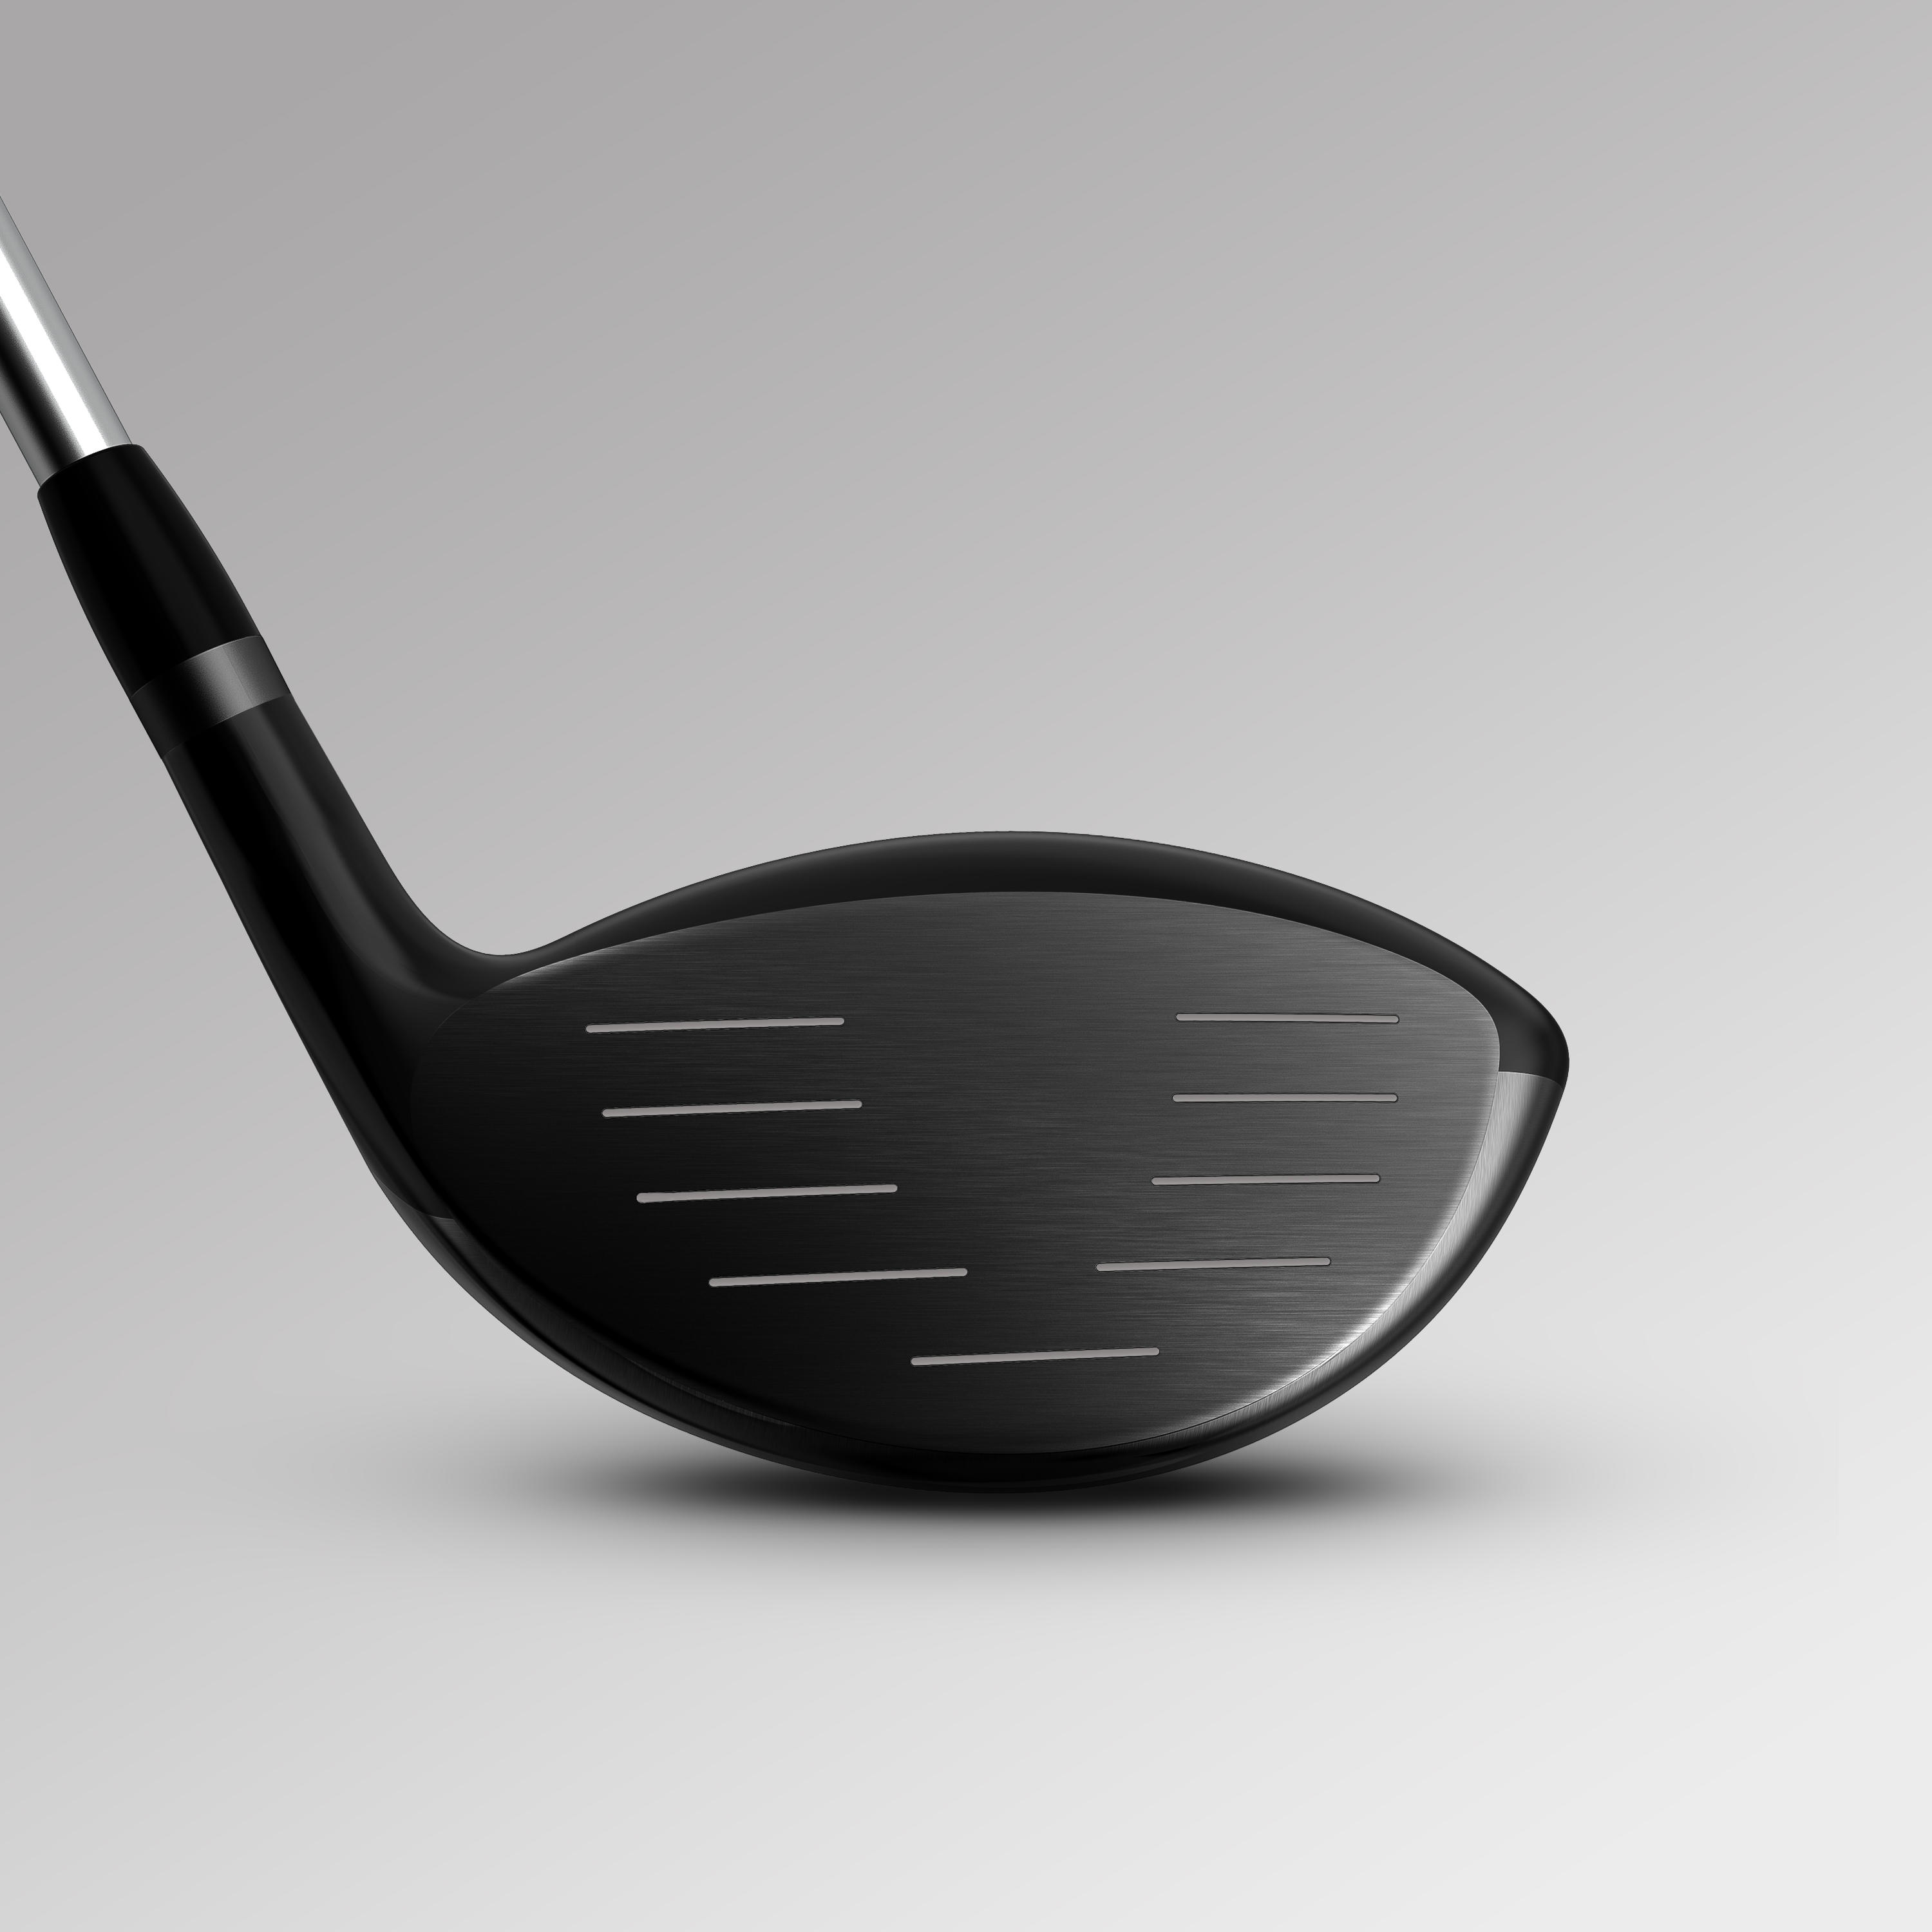 GOLF DRIVER 500 LEFT HANDED SIZE 2 & HIGH SPEED 3/8